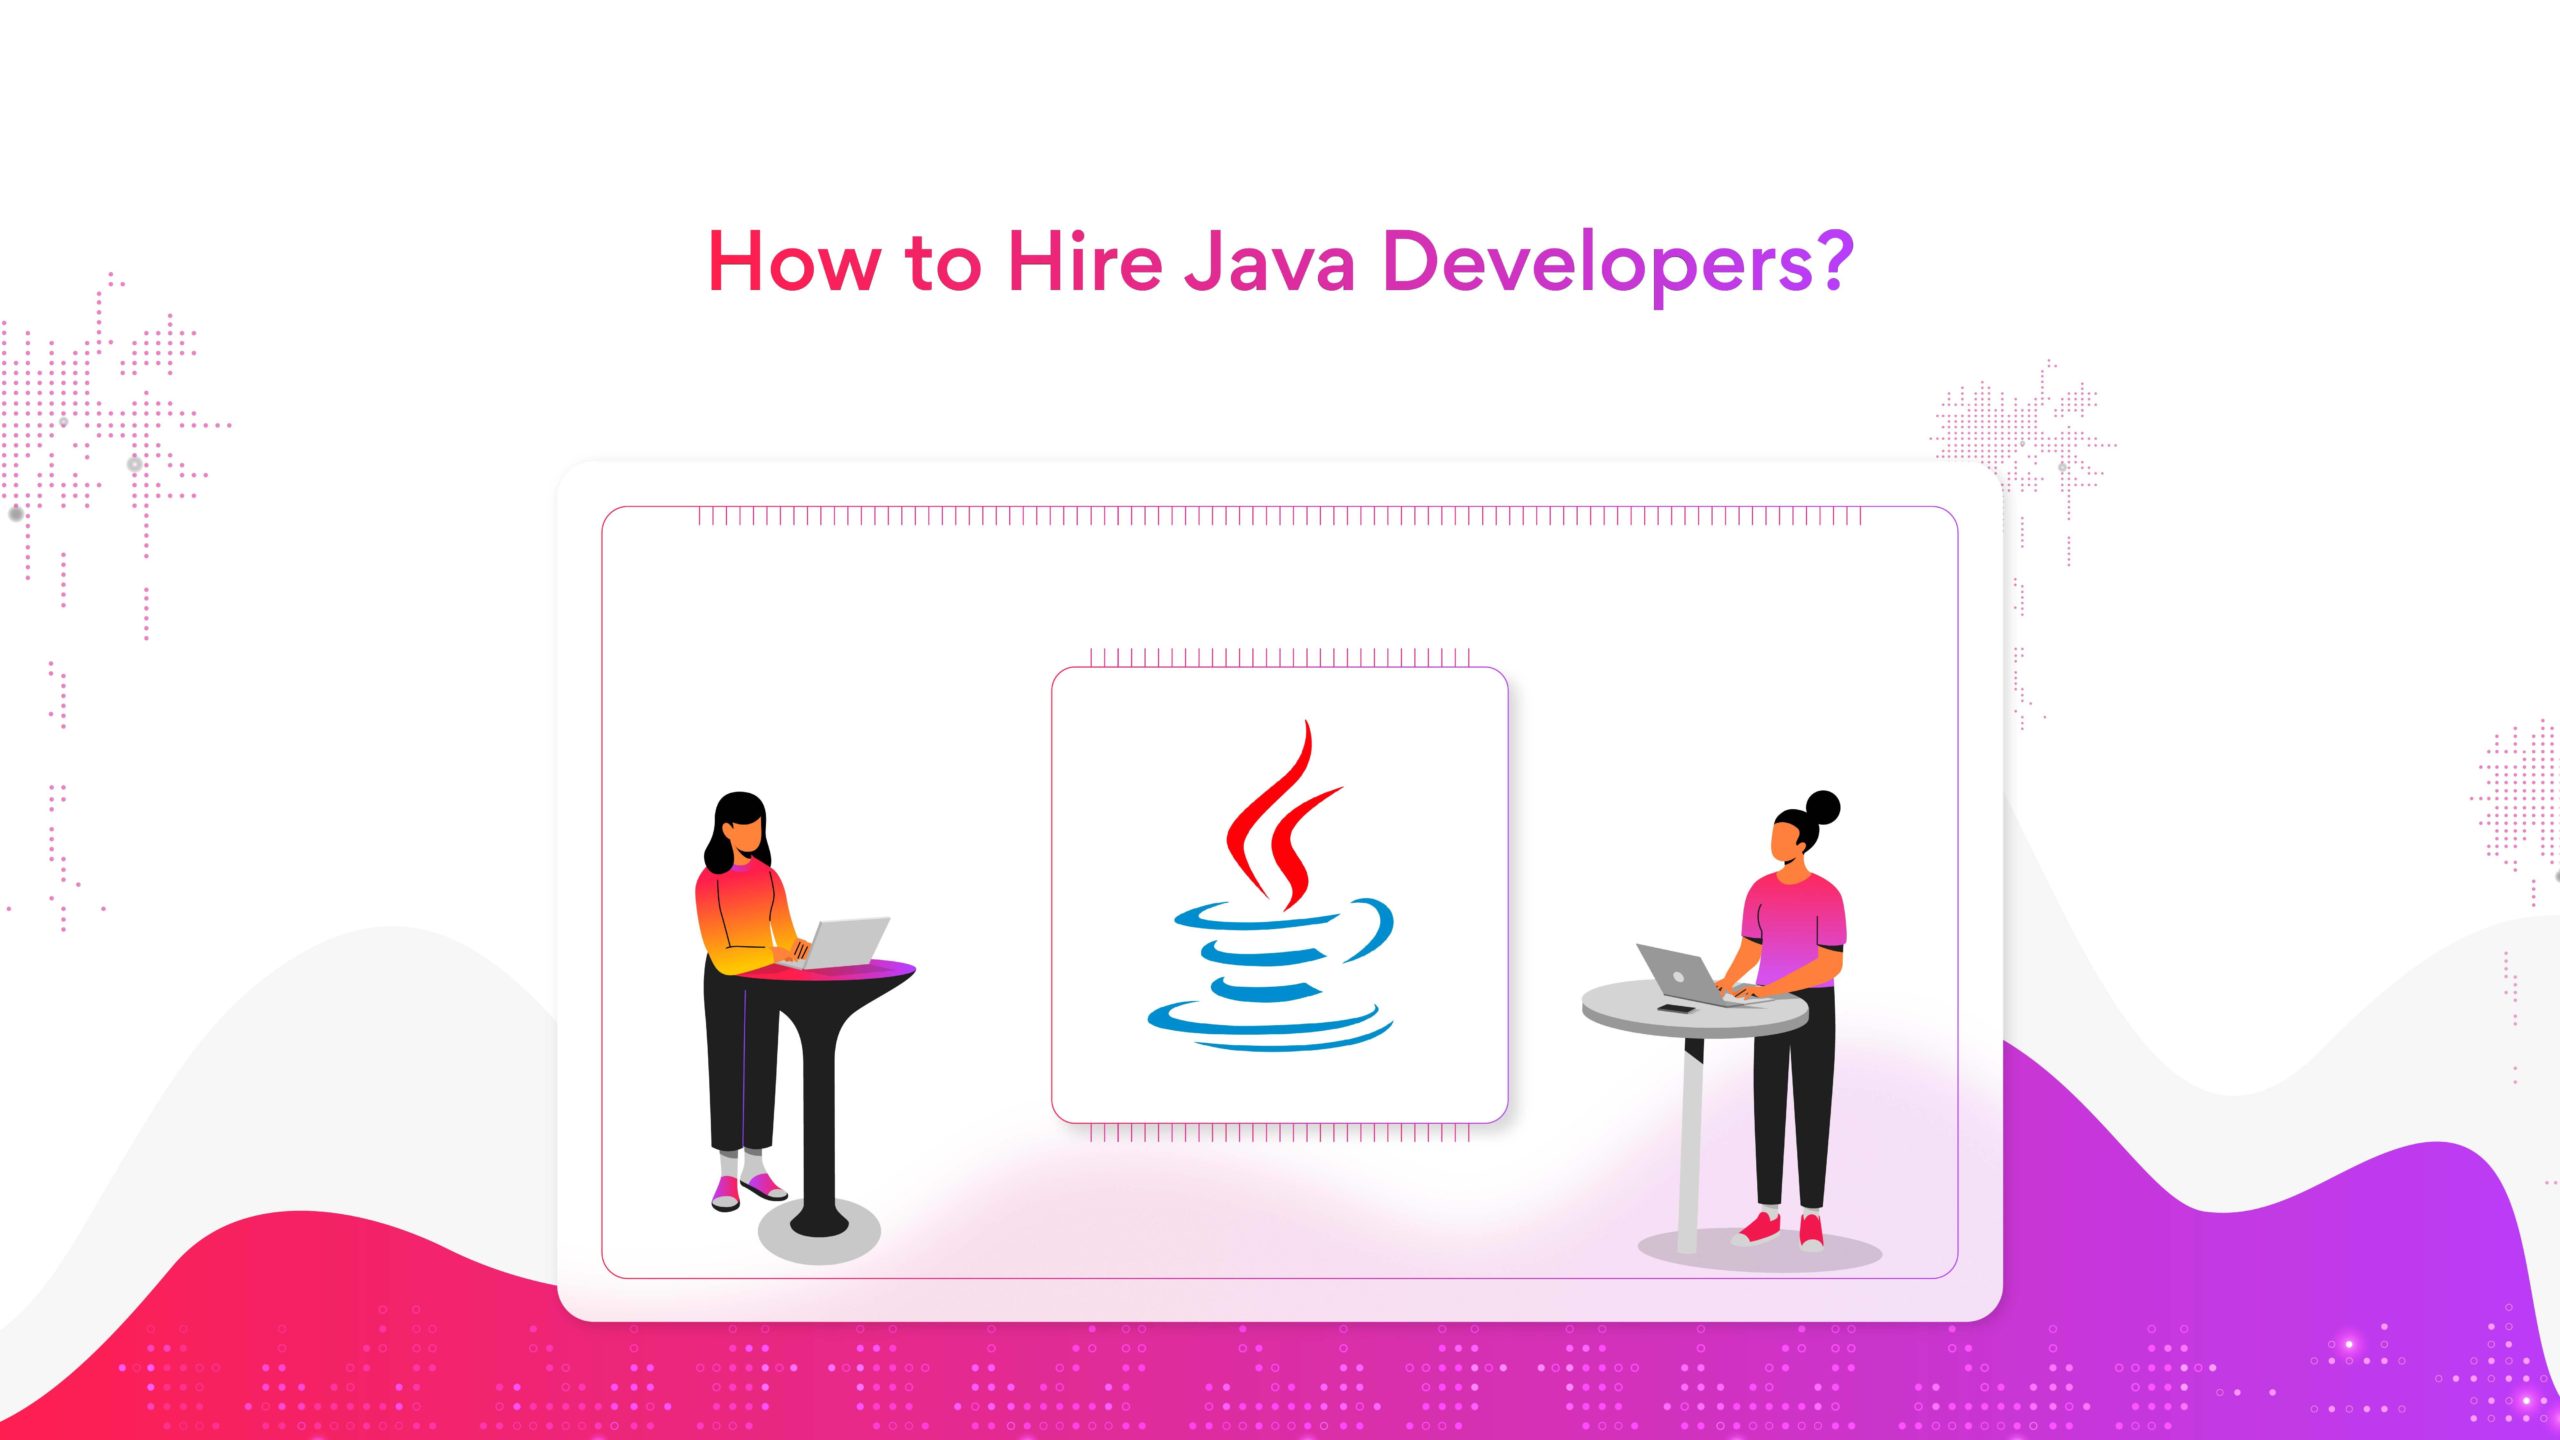 Hire Java Developers in 2023 for Your Company